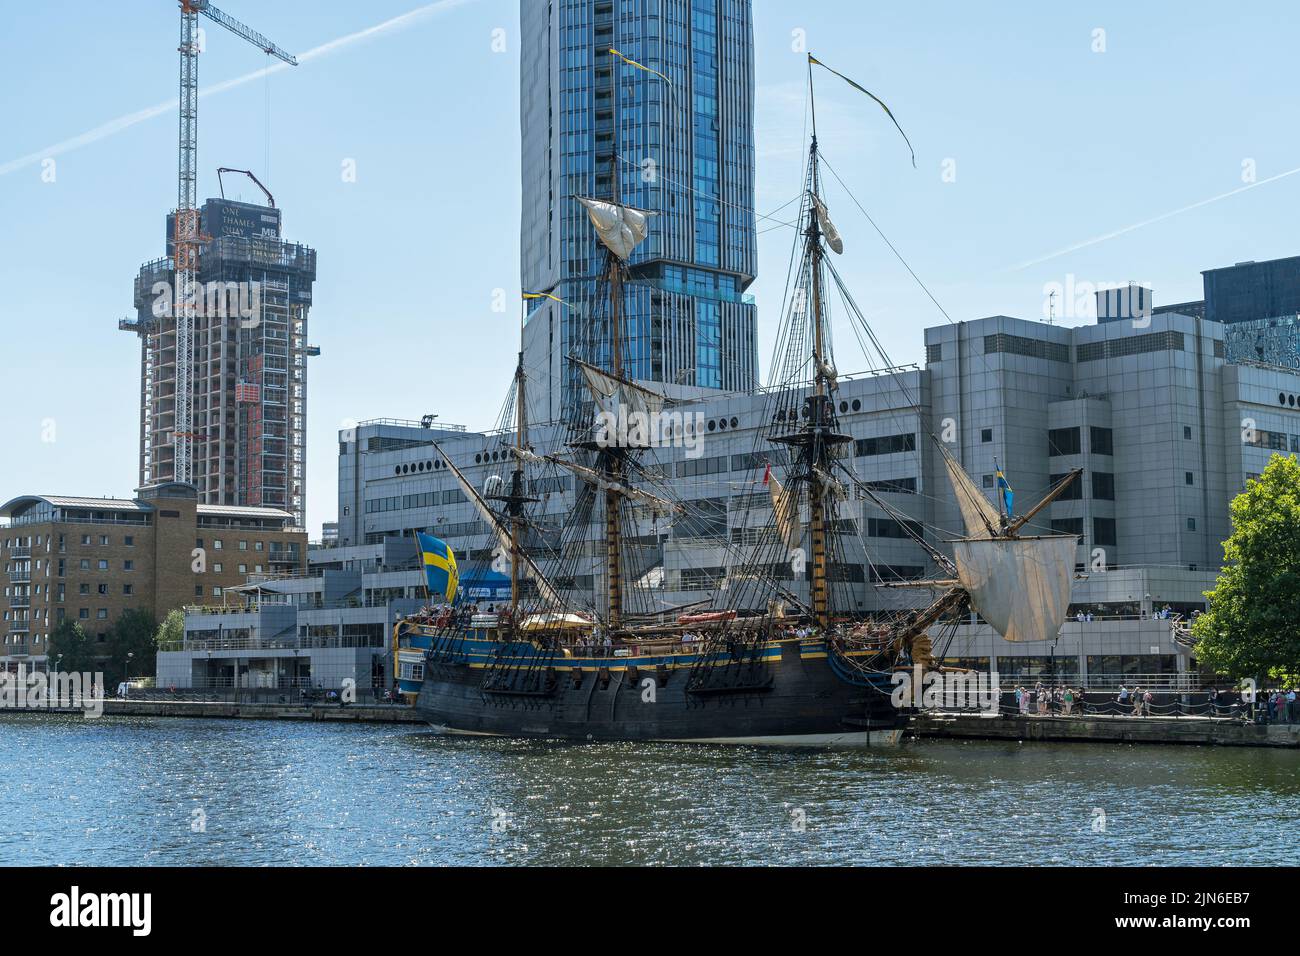 The Götheborg of Sweden, a sailing ship replica of the Swedish East Indiaman Götheborg I. Moored up in docks of Canary Wharf. London - 9th August 2022 Stock Photo